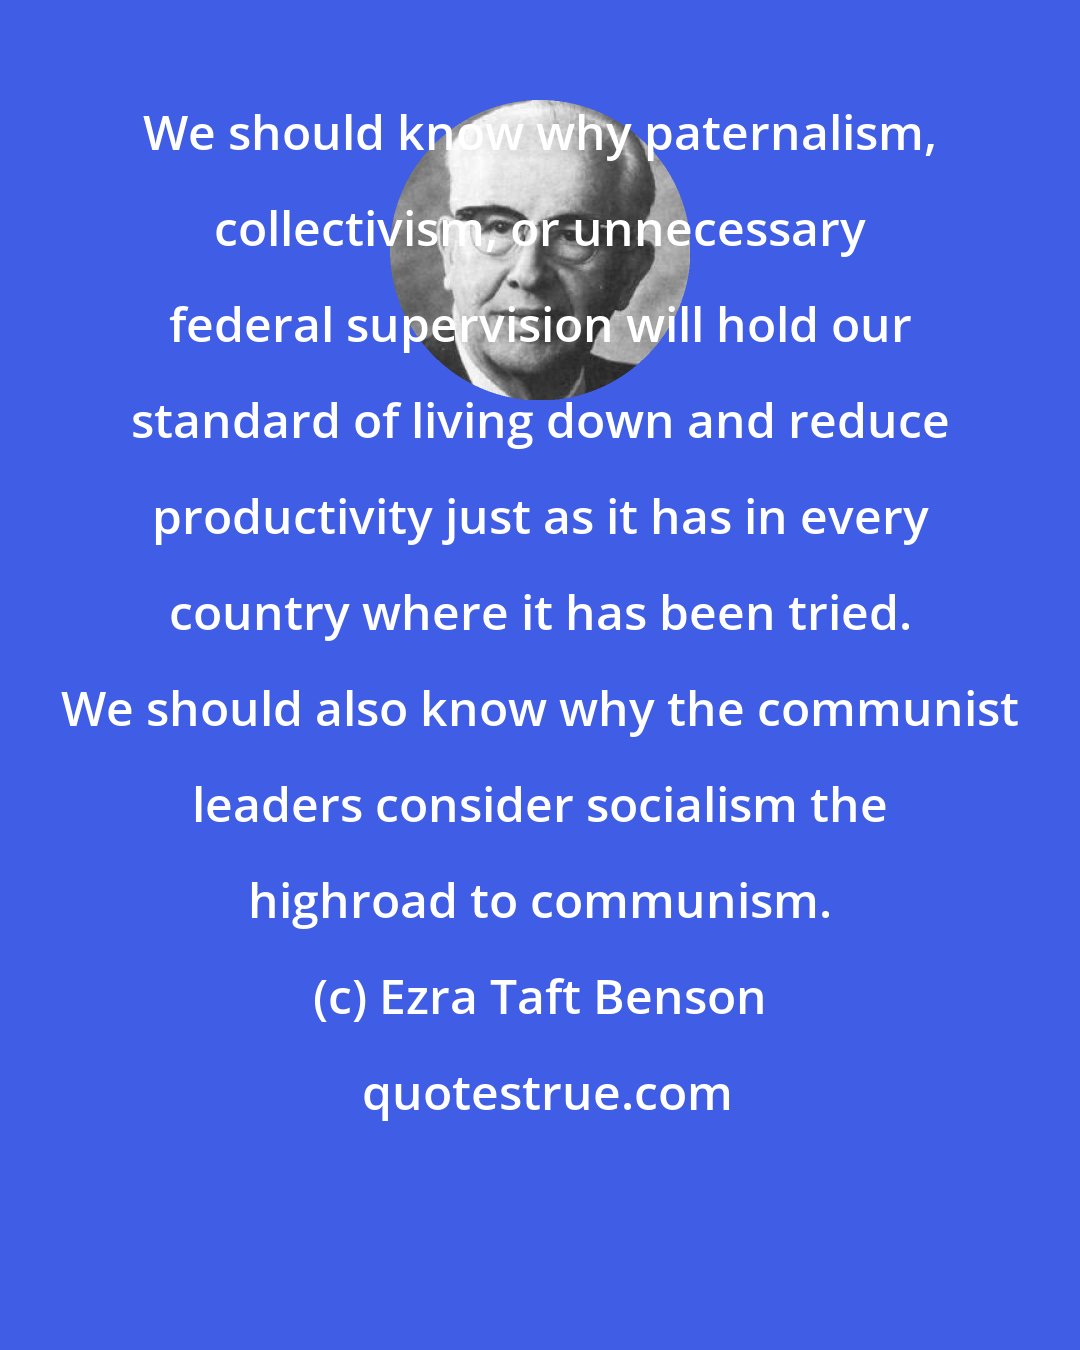 Ezra Taft Benson: We should know why paternalism, collectivism, or unnecessary federal supervision will hold our standard of living down and reduce productivity just as it has in every country where it has been tried. We should also know why the communist leaders consider socialism the highroad to communism.